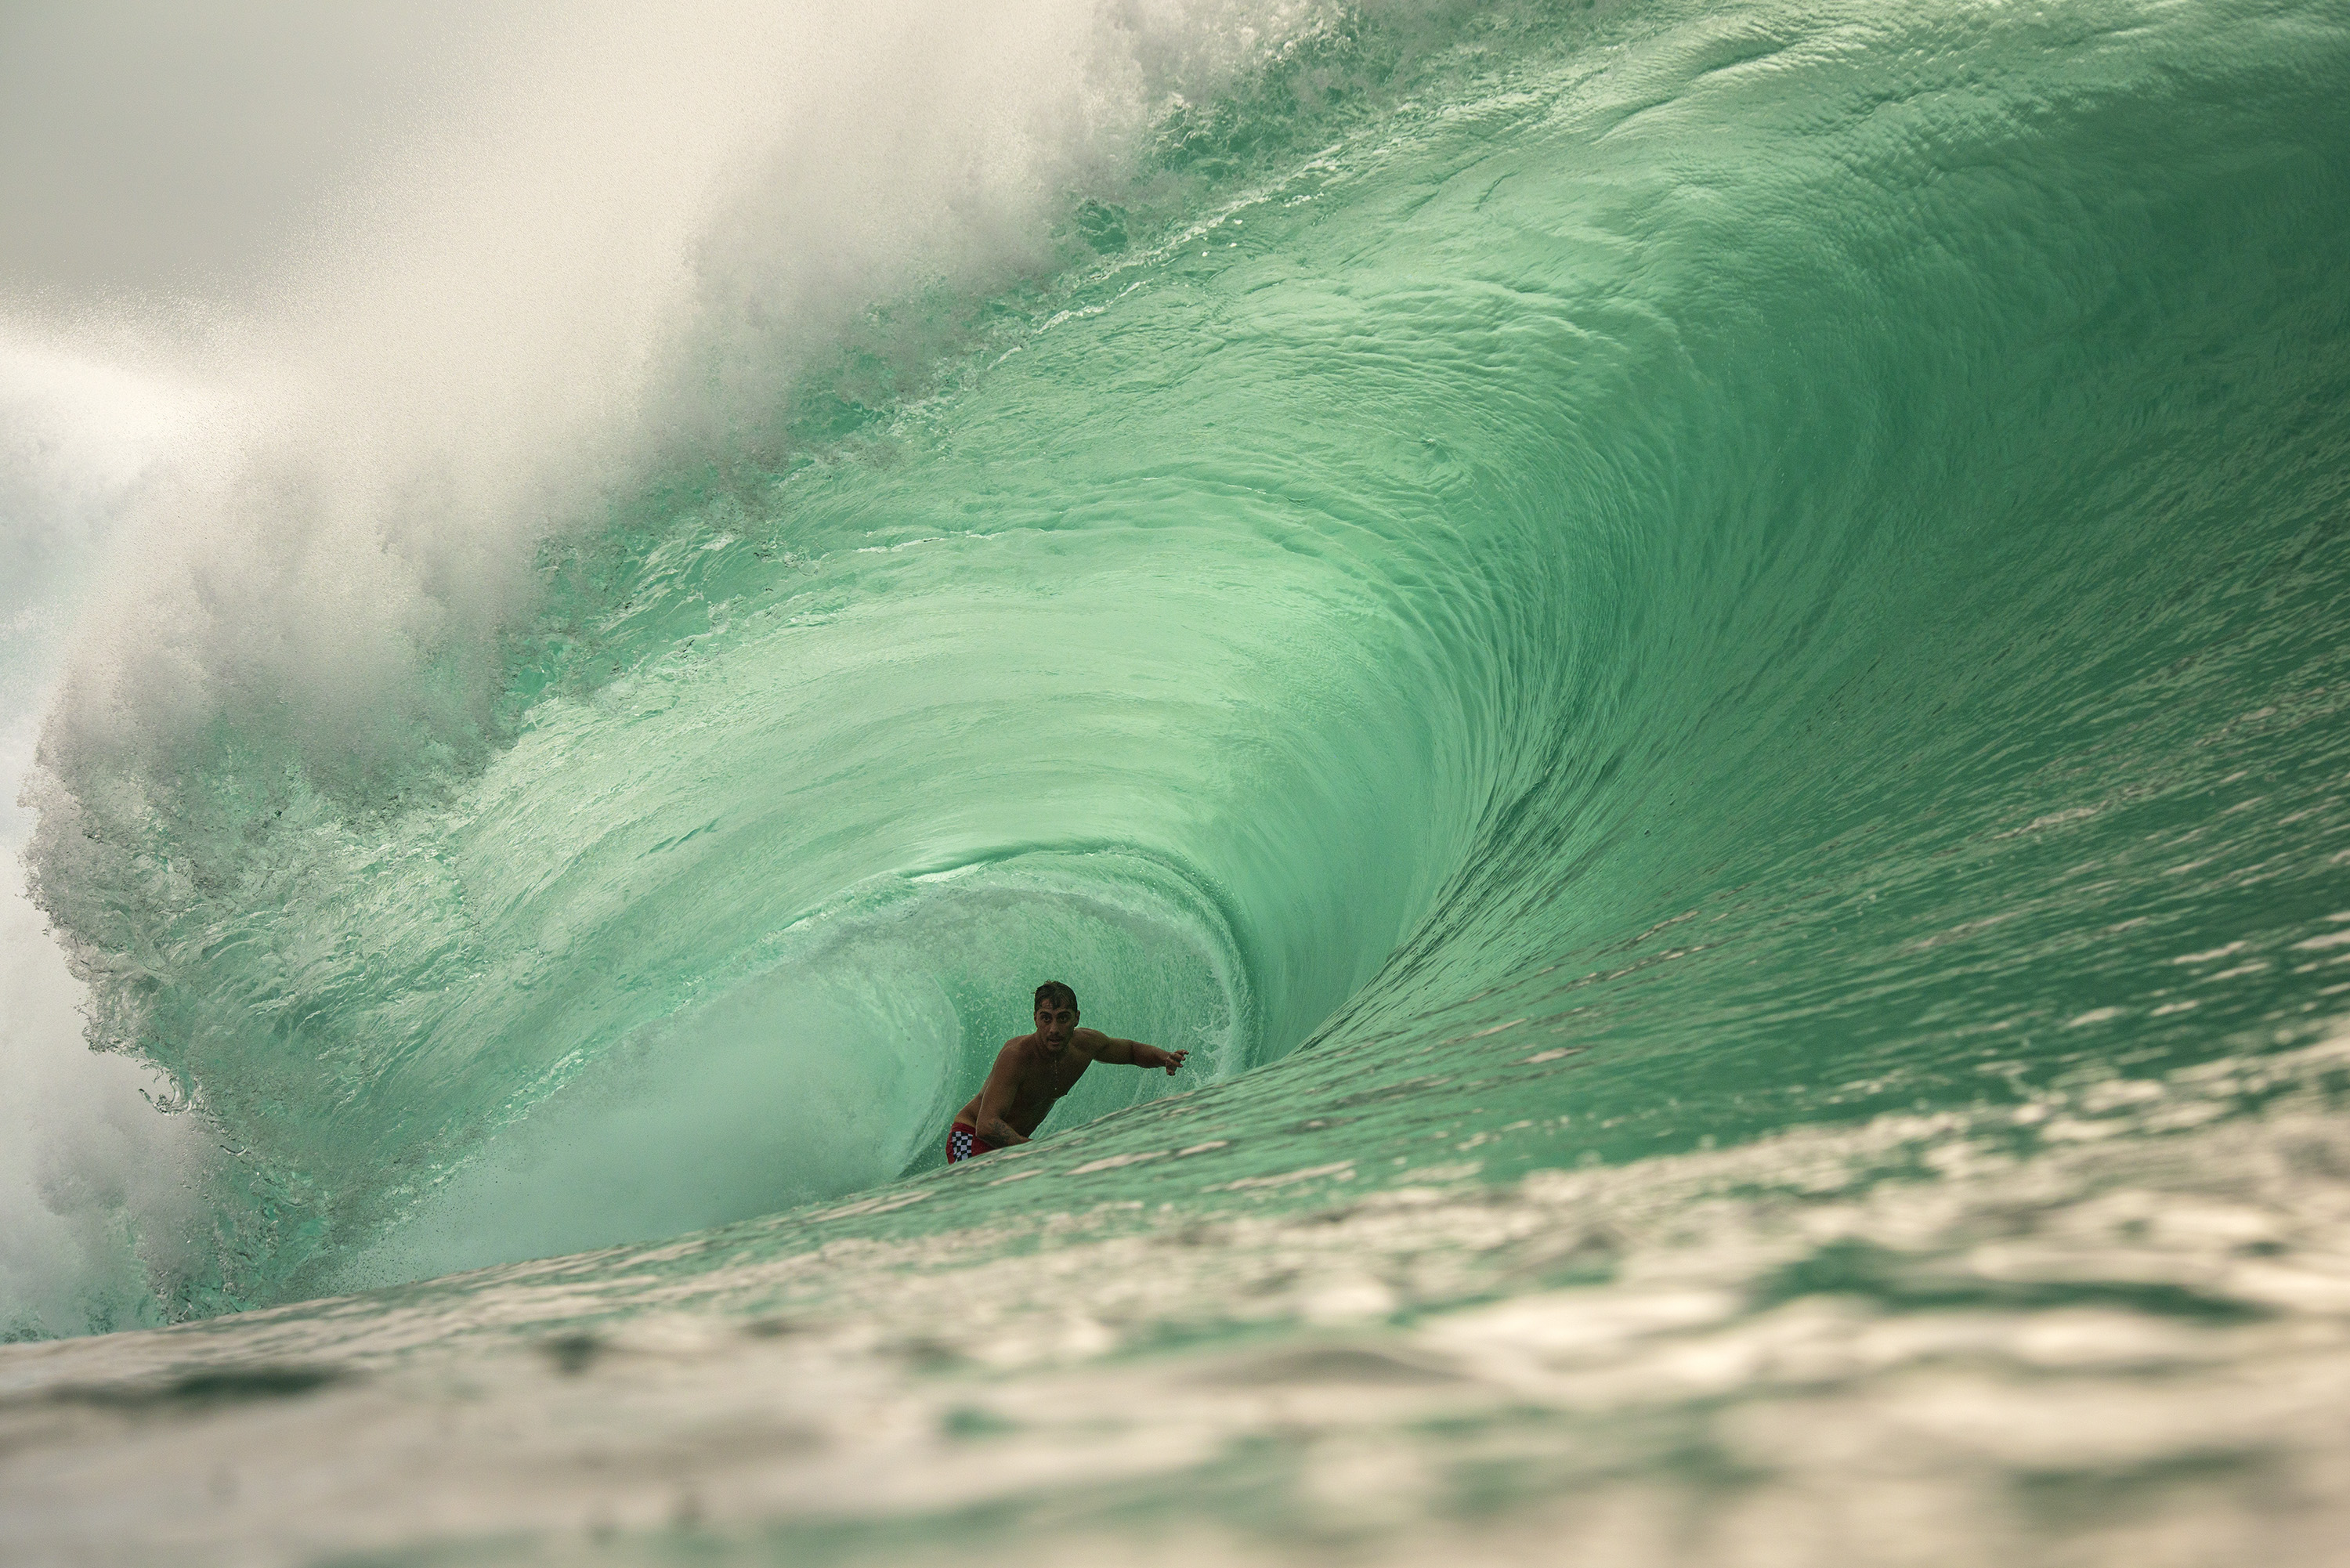 Gallery: More Perfect Pipeline